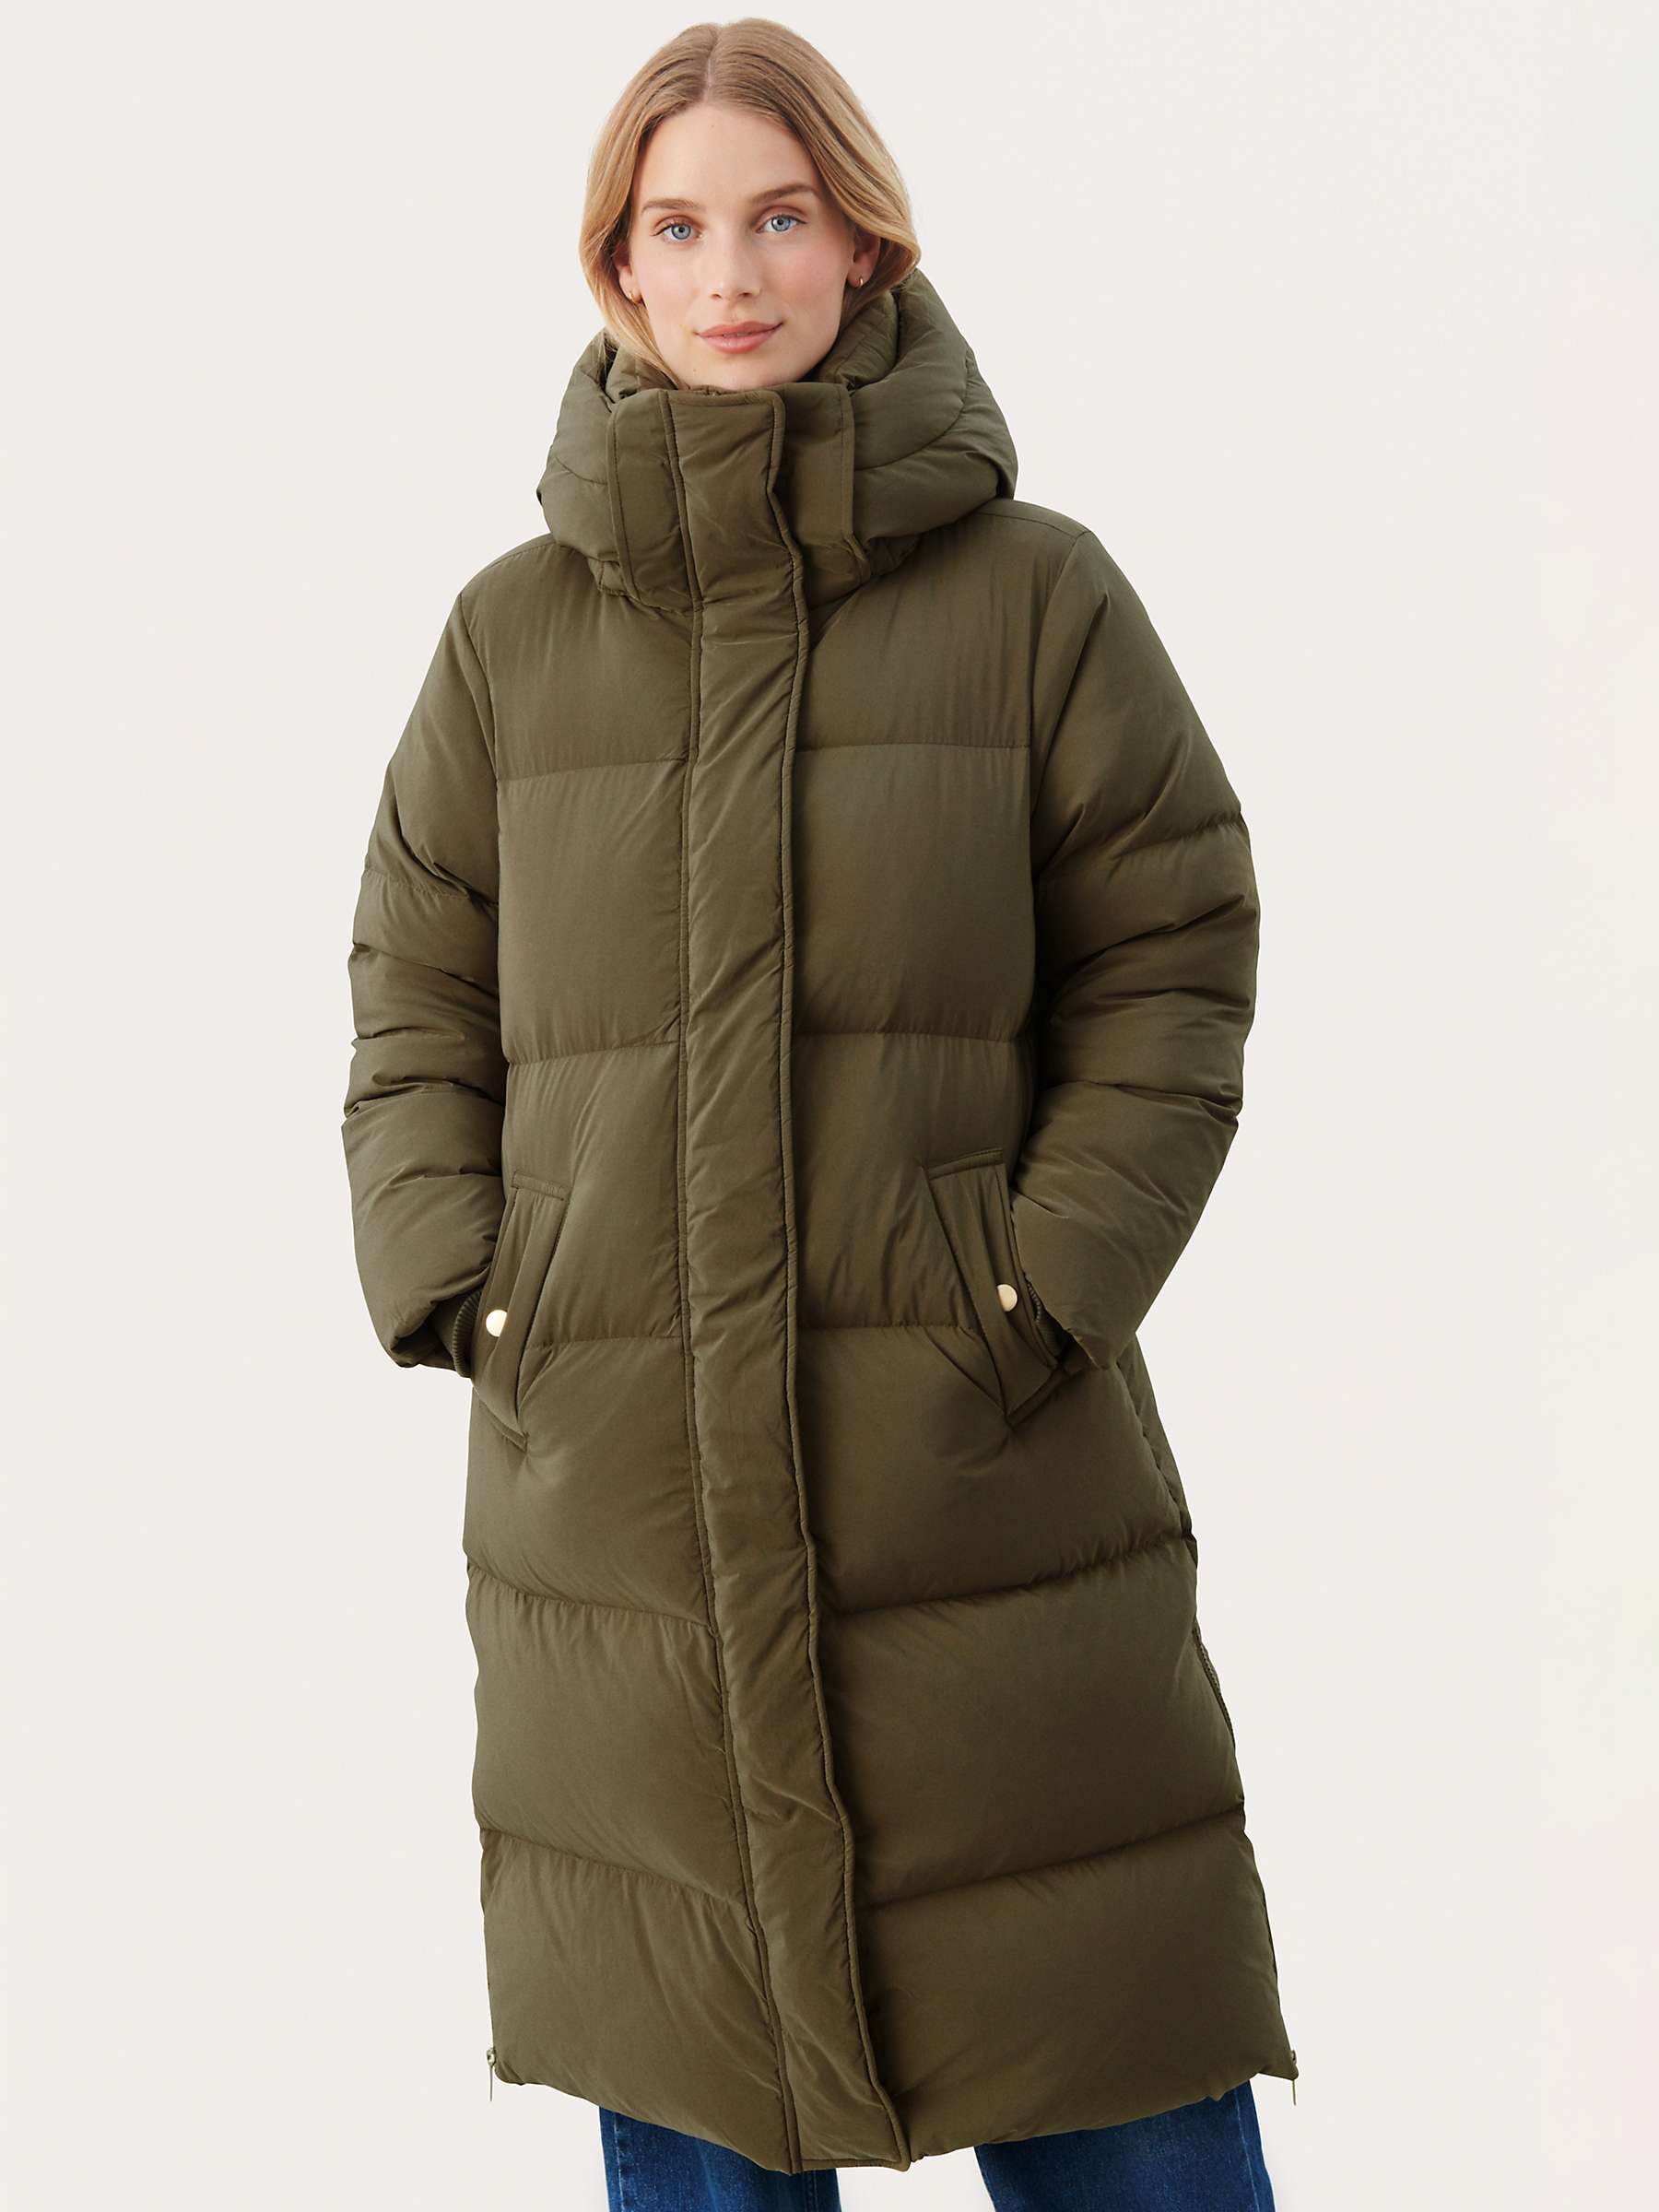 Buy Part Two Storma Longline Puffer Coat, Capers Online at johnlewis.com